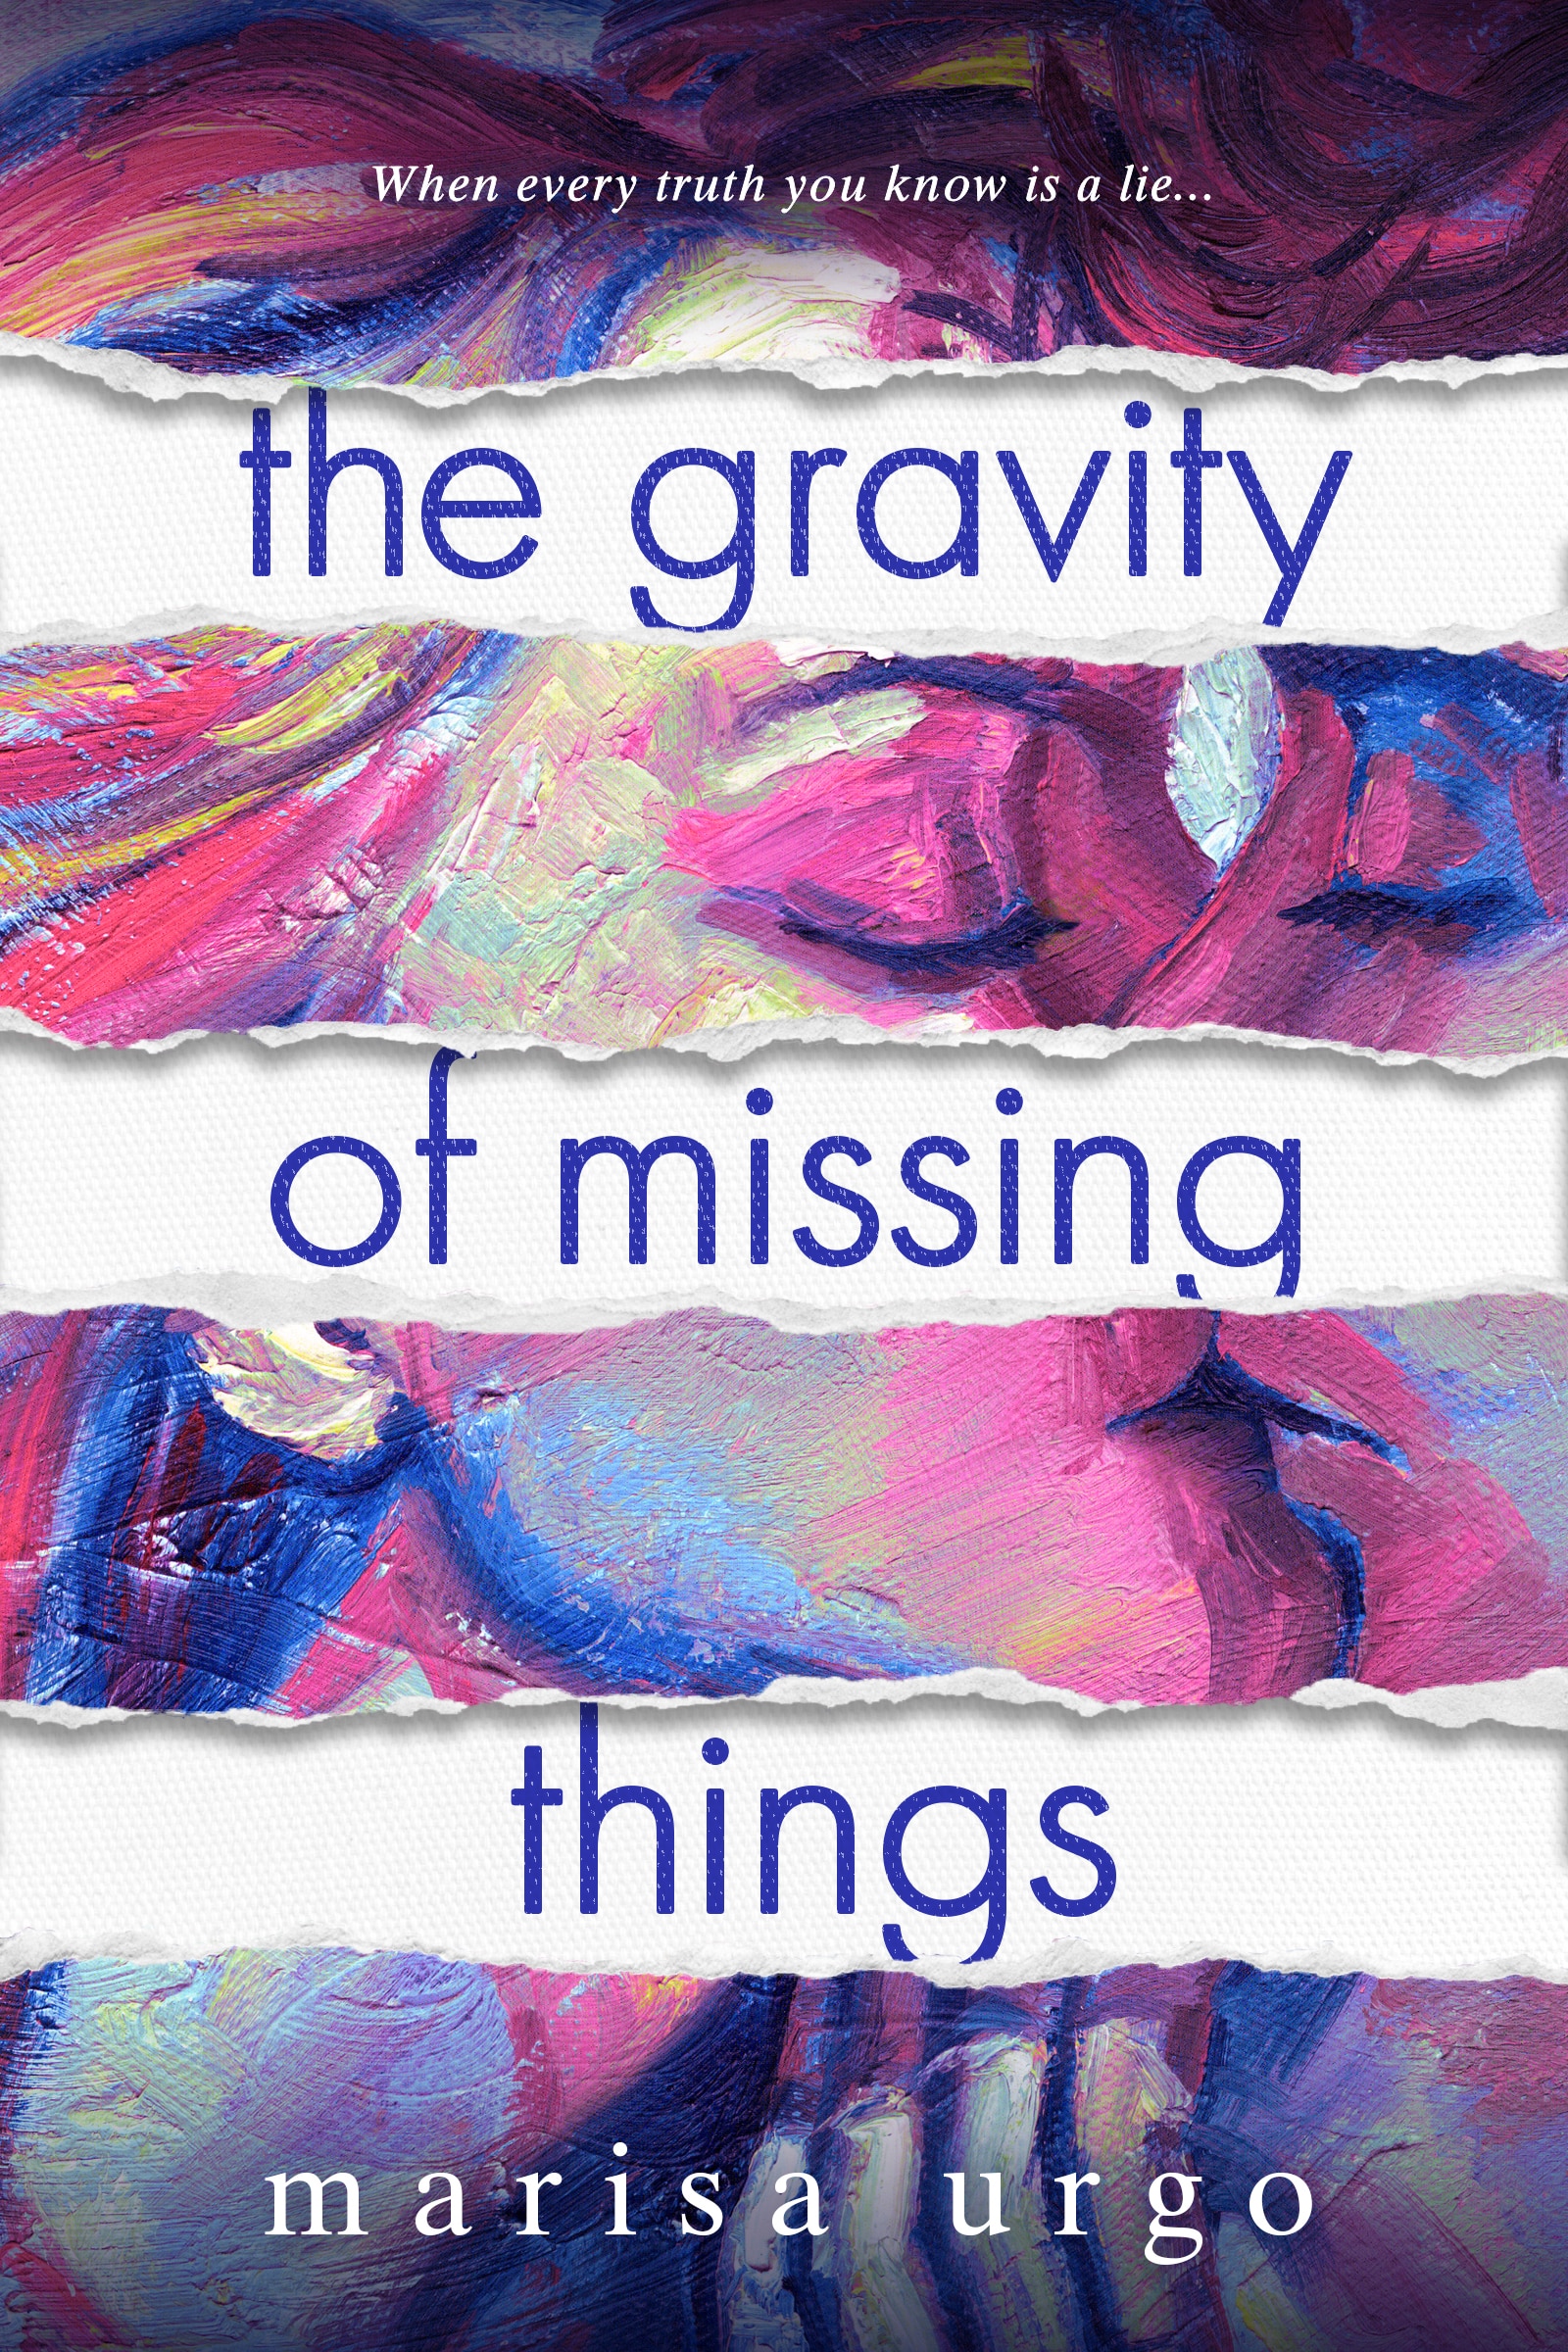 Urgo, THE GRAVITY OF MISSING THINGS